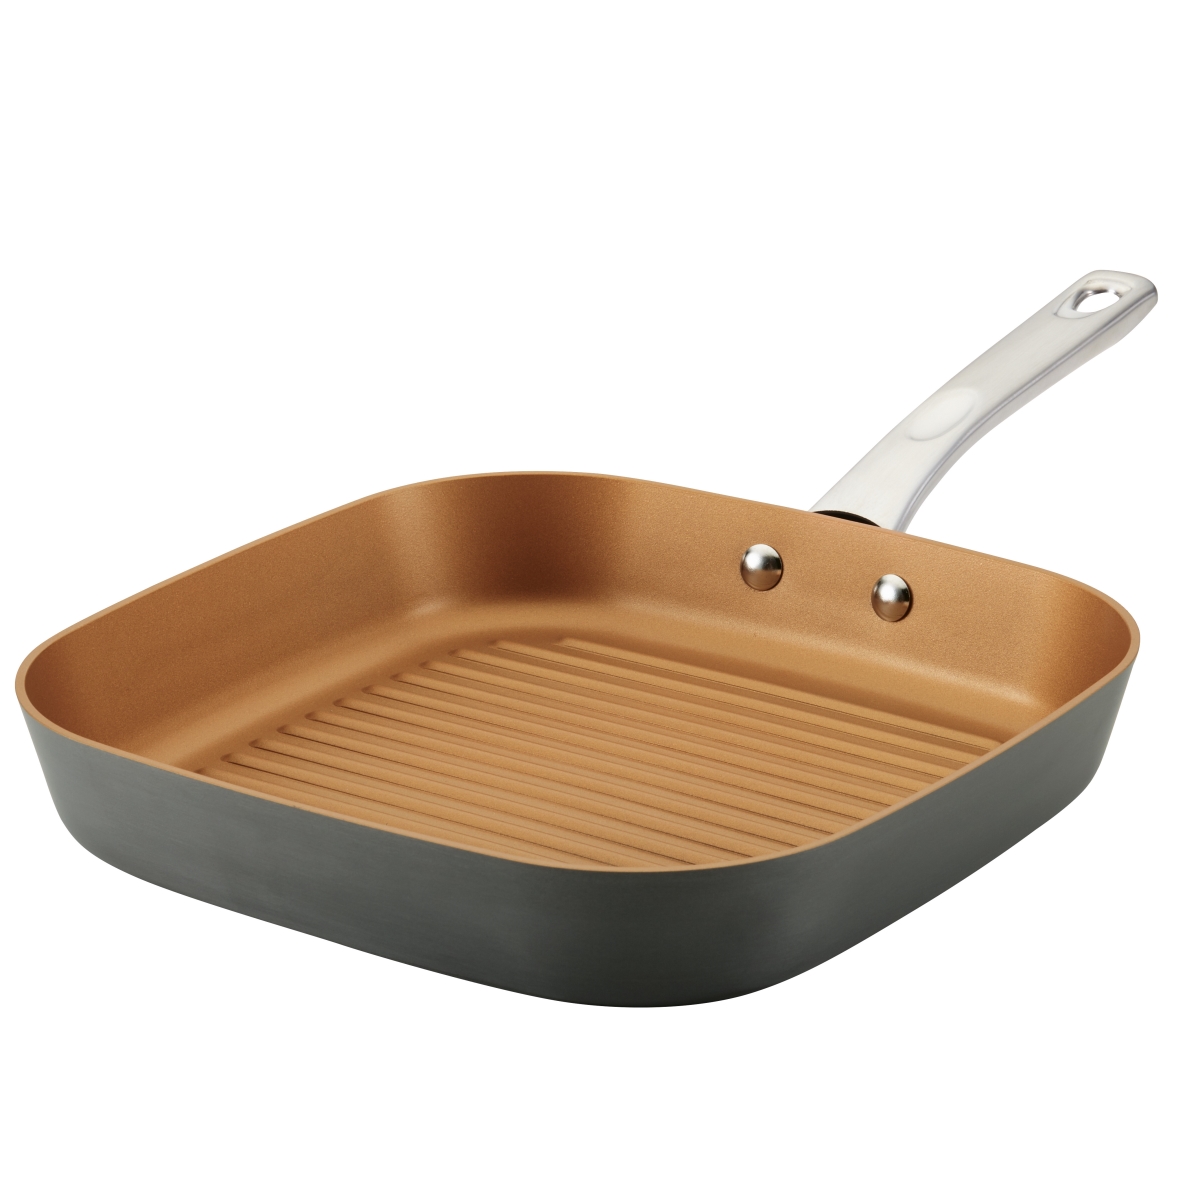 80266 Hard Anodized Aluminum Deep Square Grill Pan, 11.25 In.